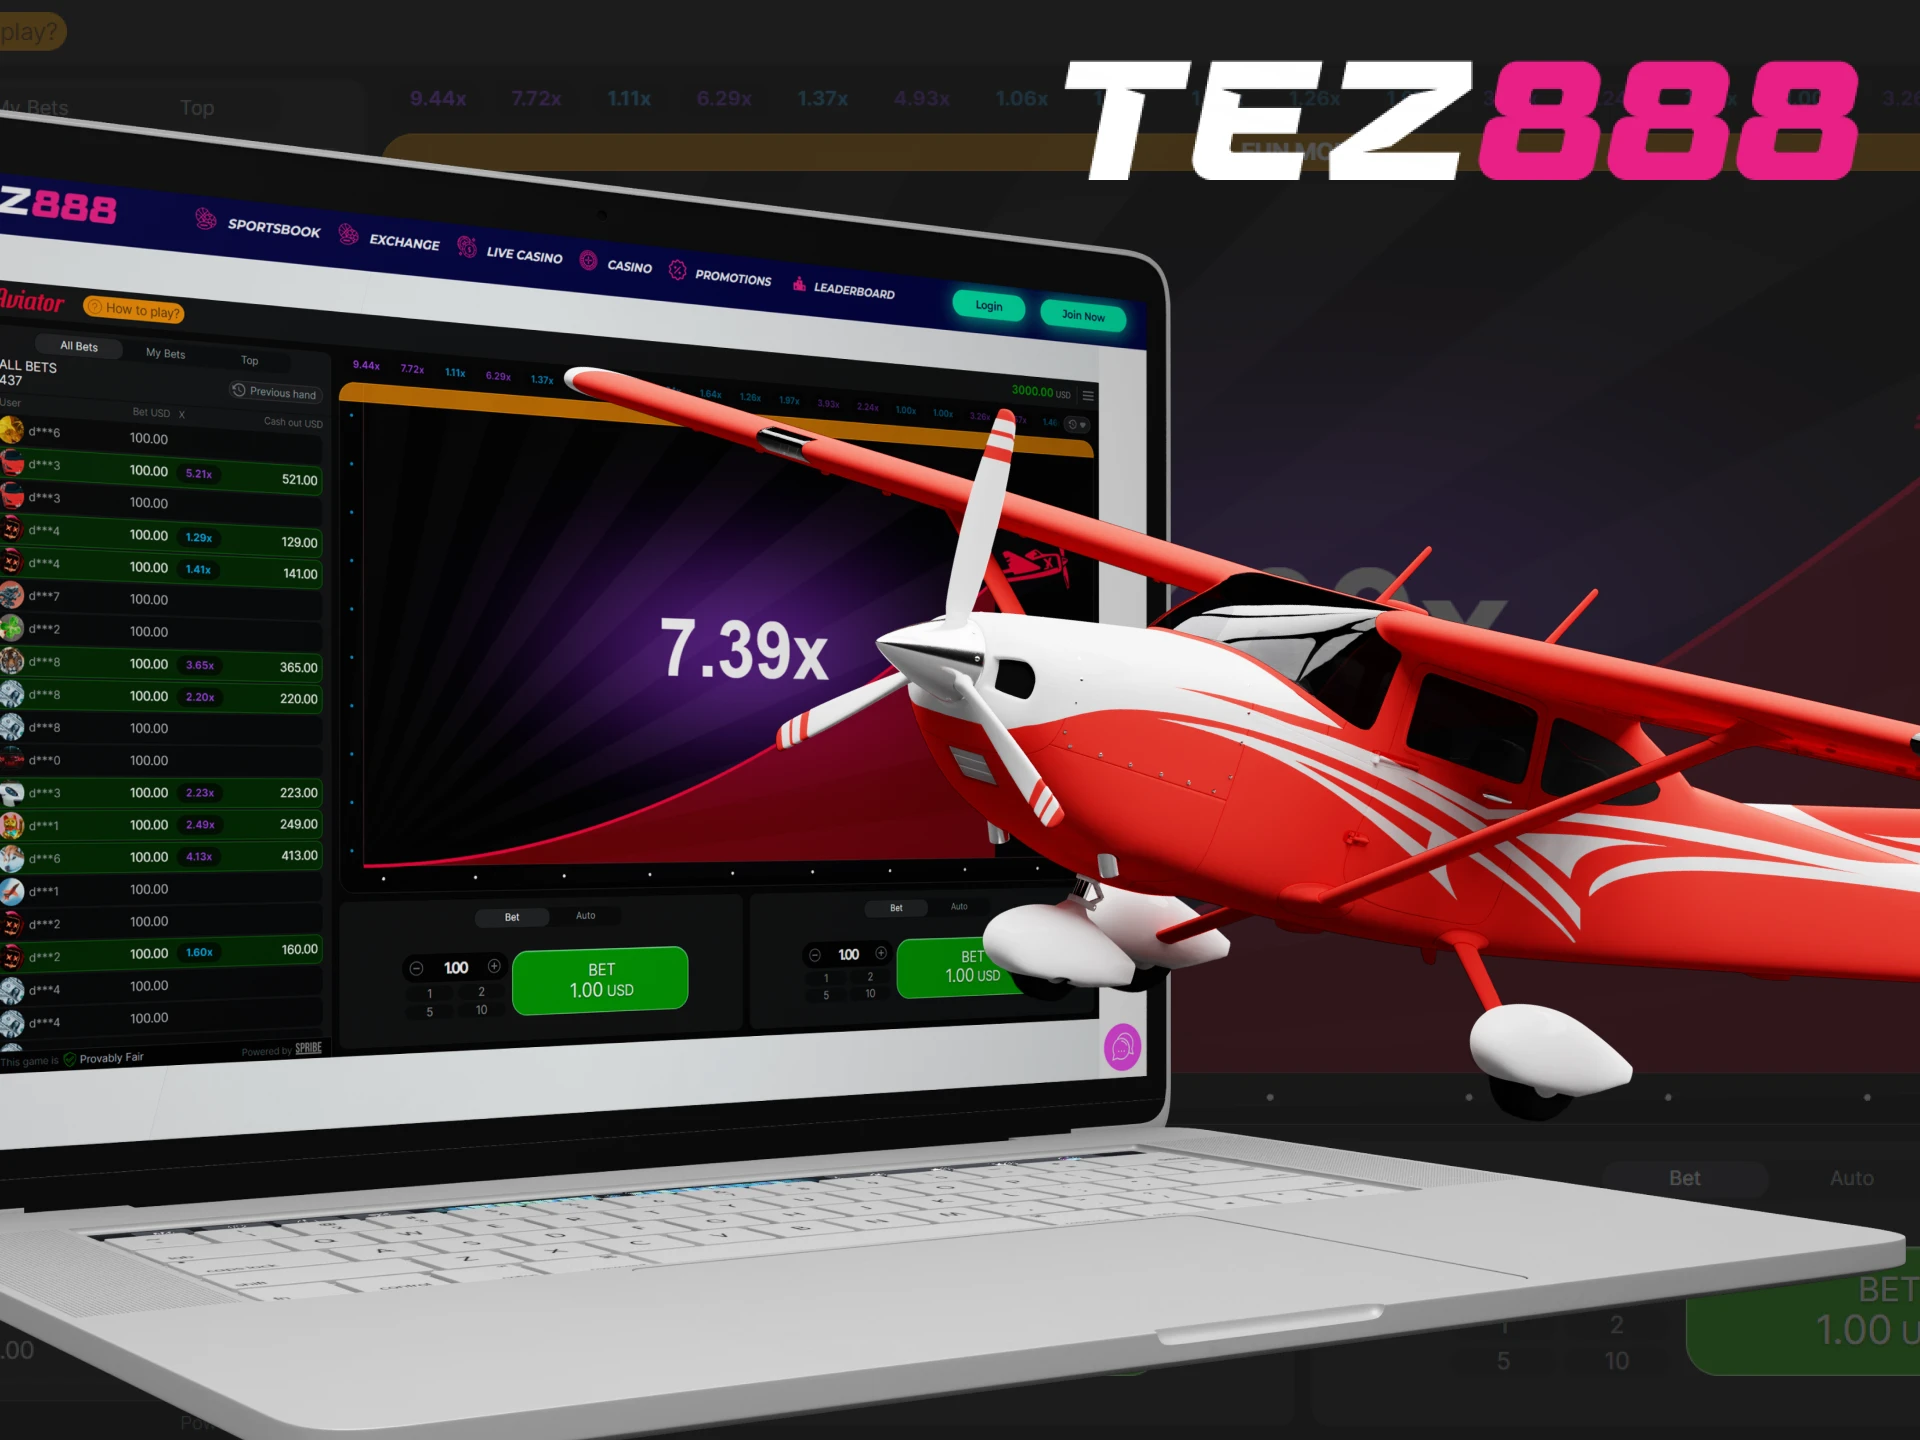 You can play the Aviator crash game at Tez888 Casino.